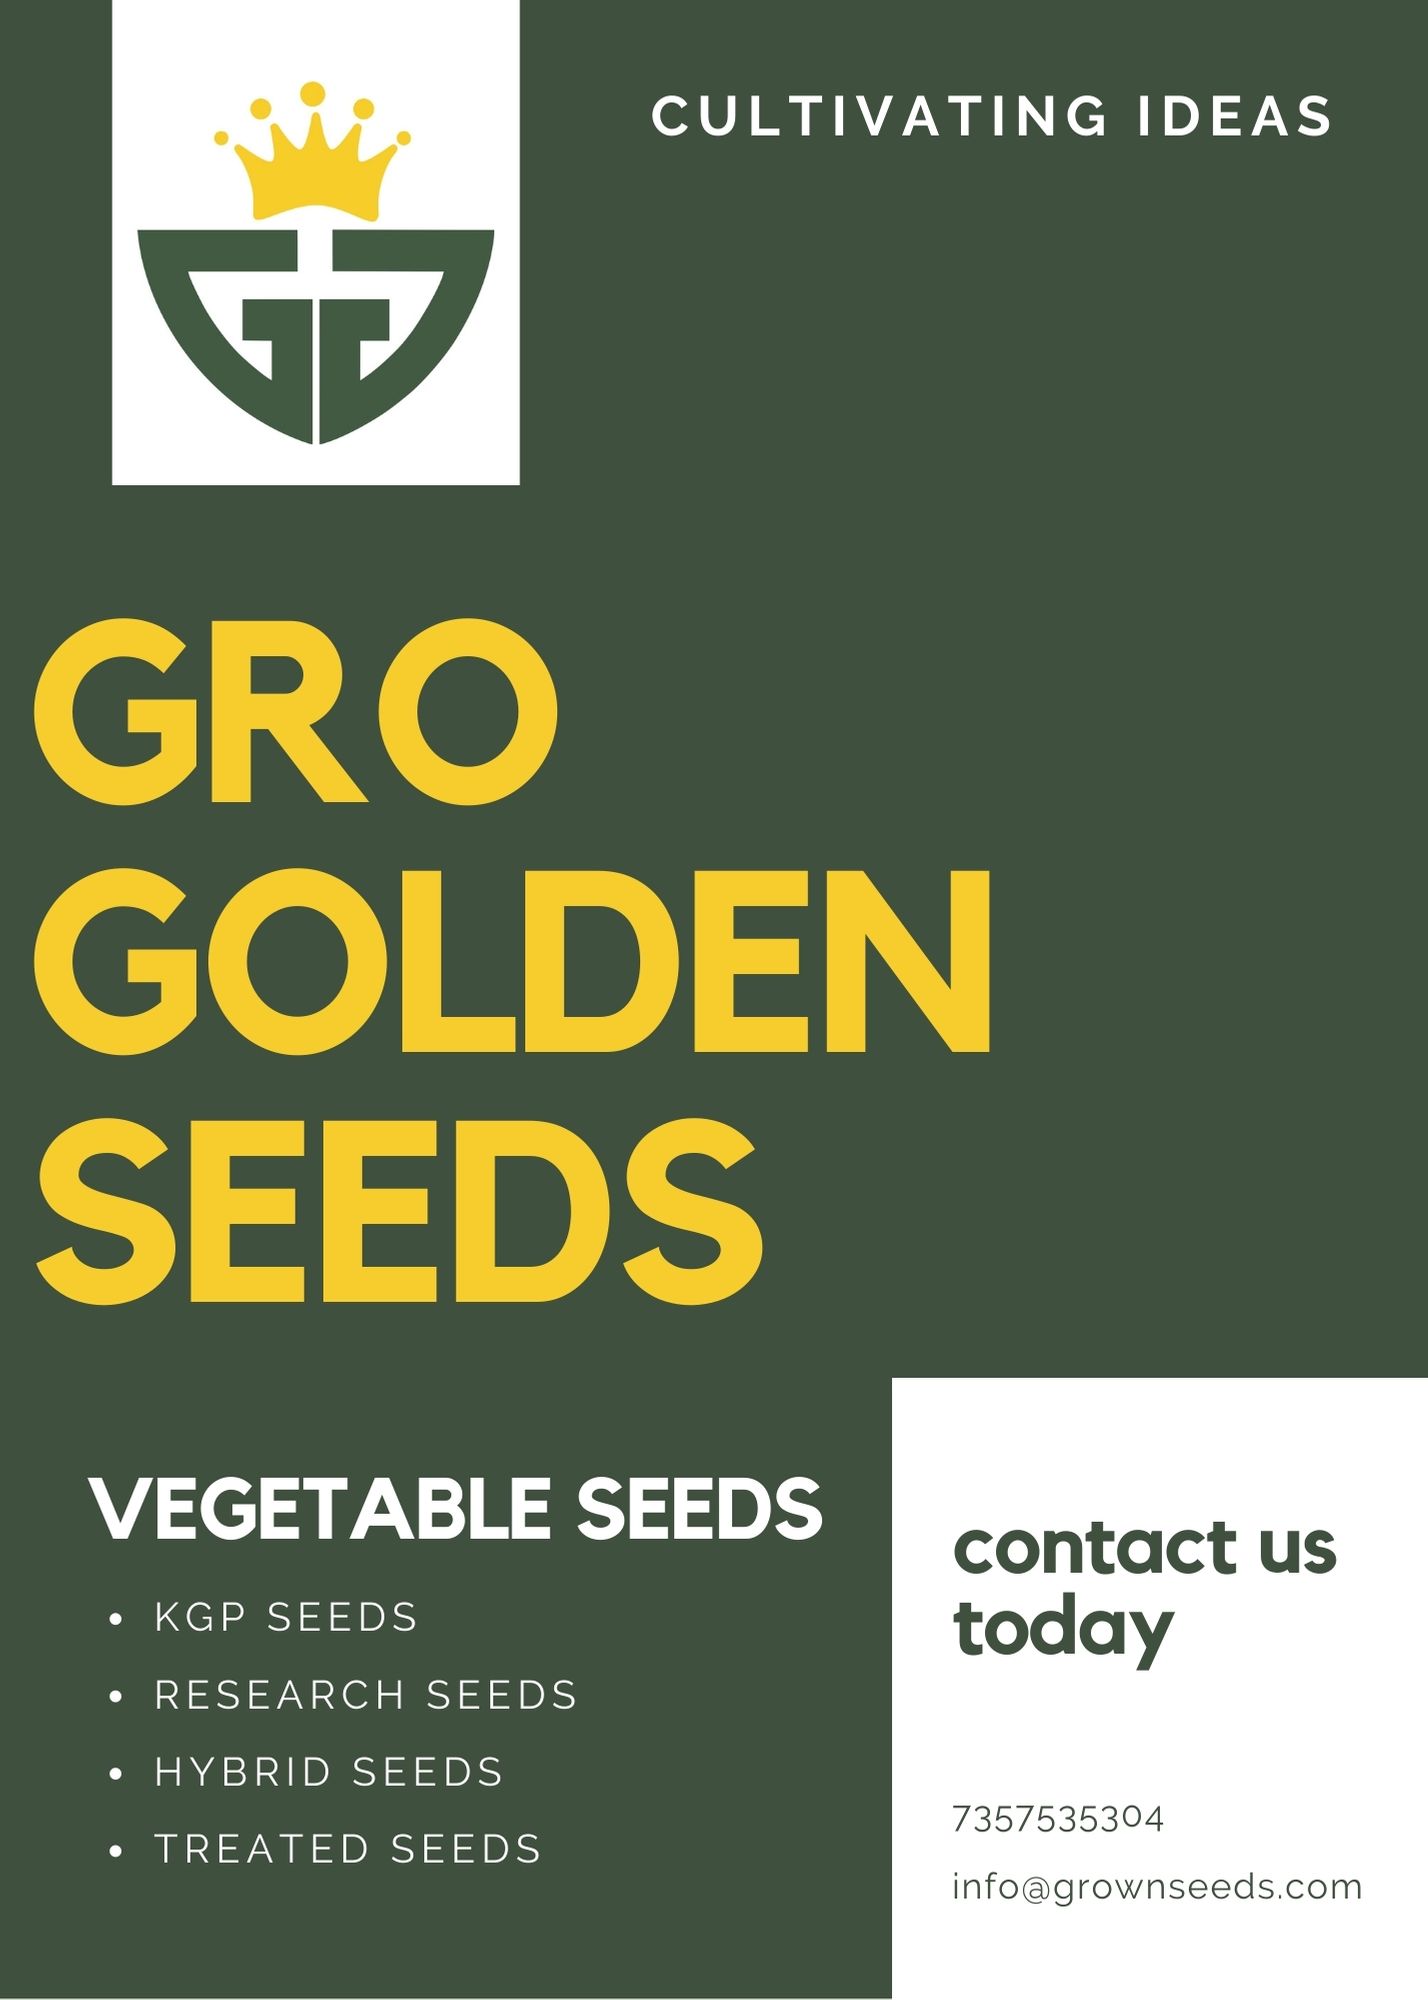 Research Vegetable Seeds